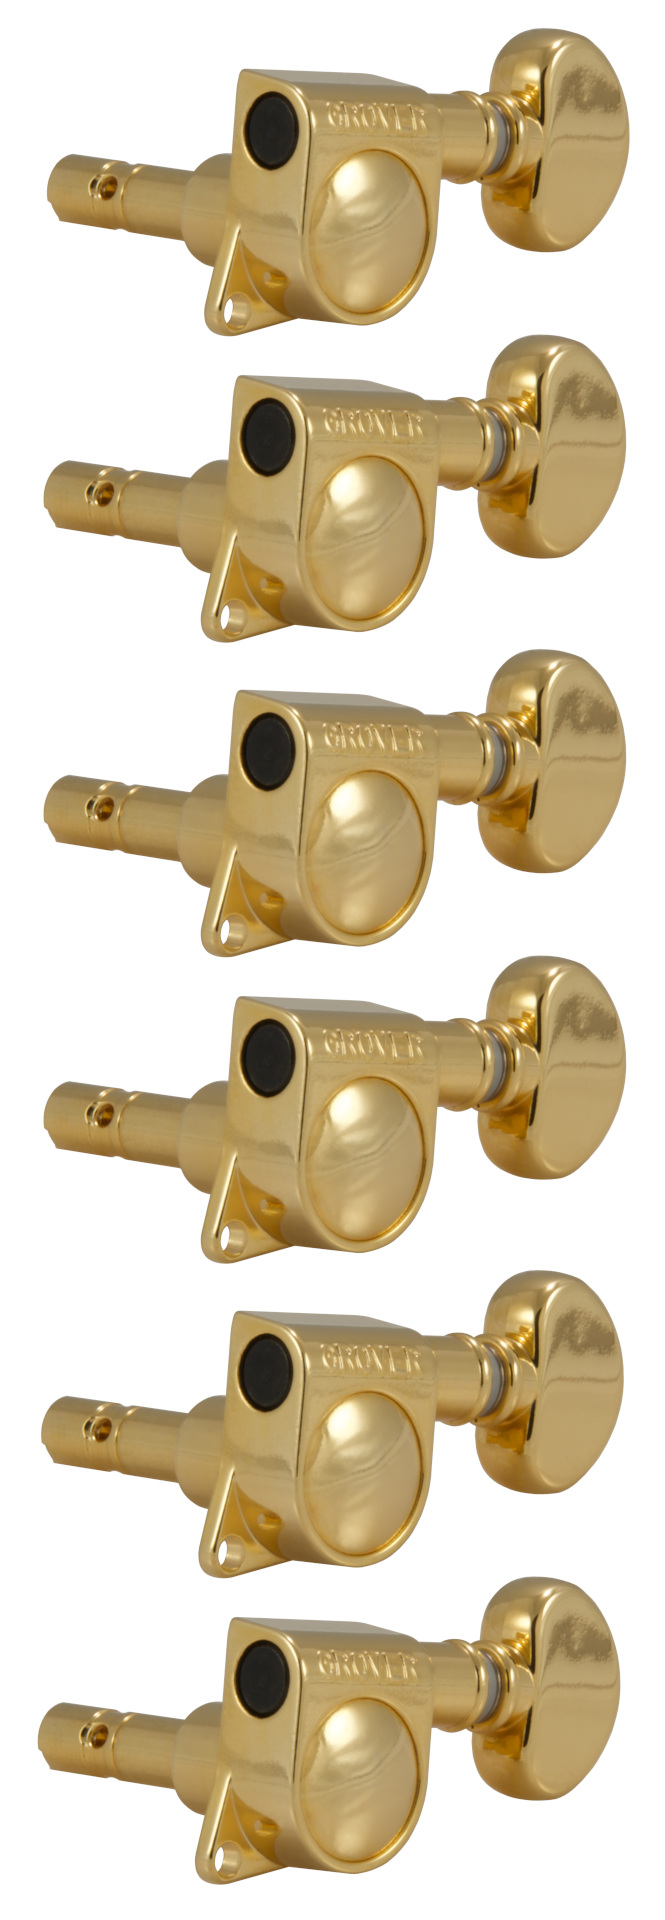 Grover 406G6 Mini Locking Rotomatics with Round Button - Guitar Machine Heads, 6-in-Line, Bass Side (Left) - Gold